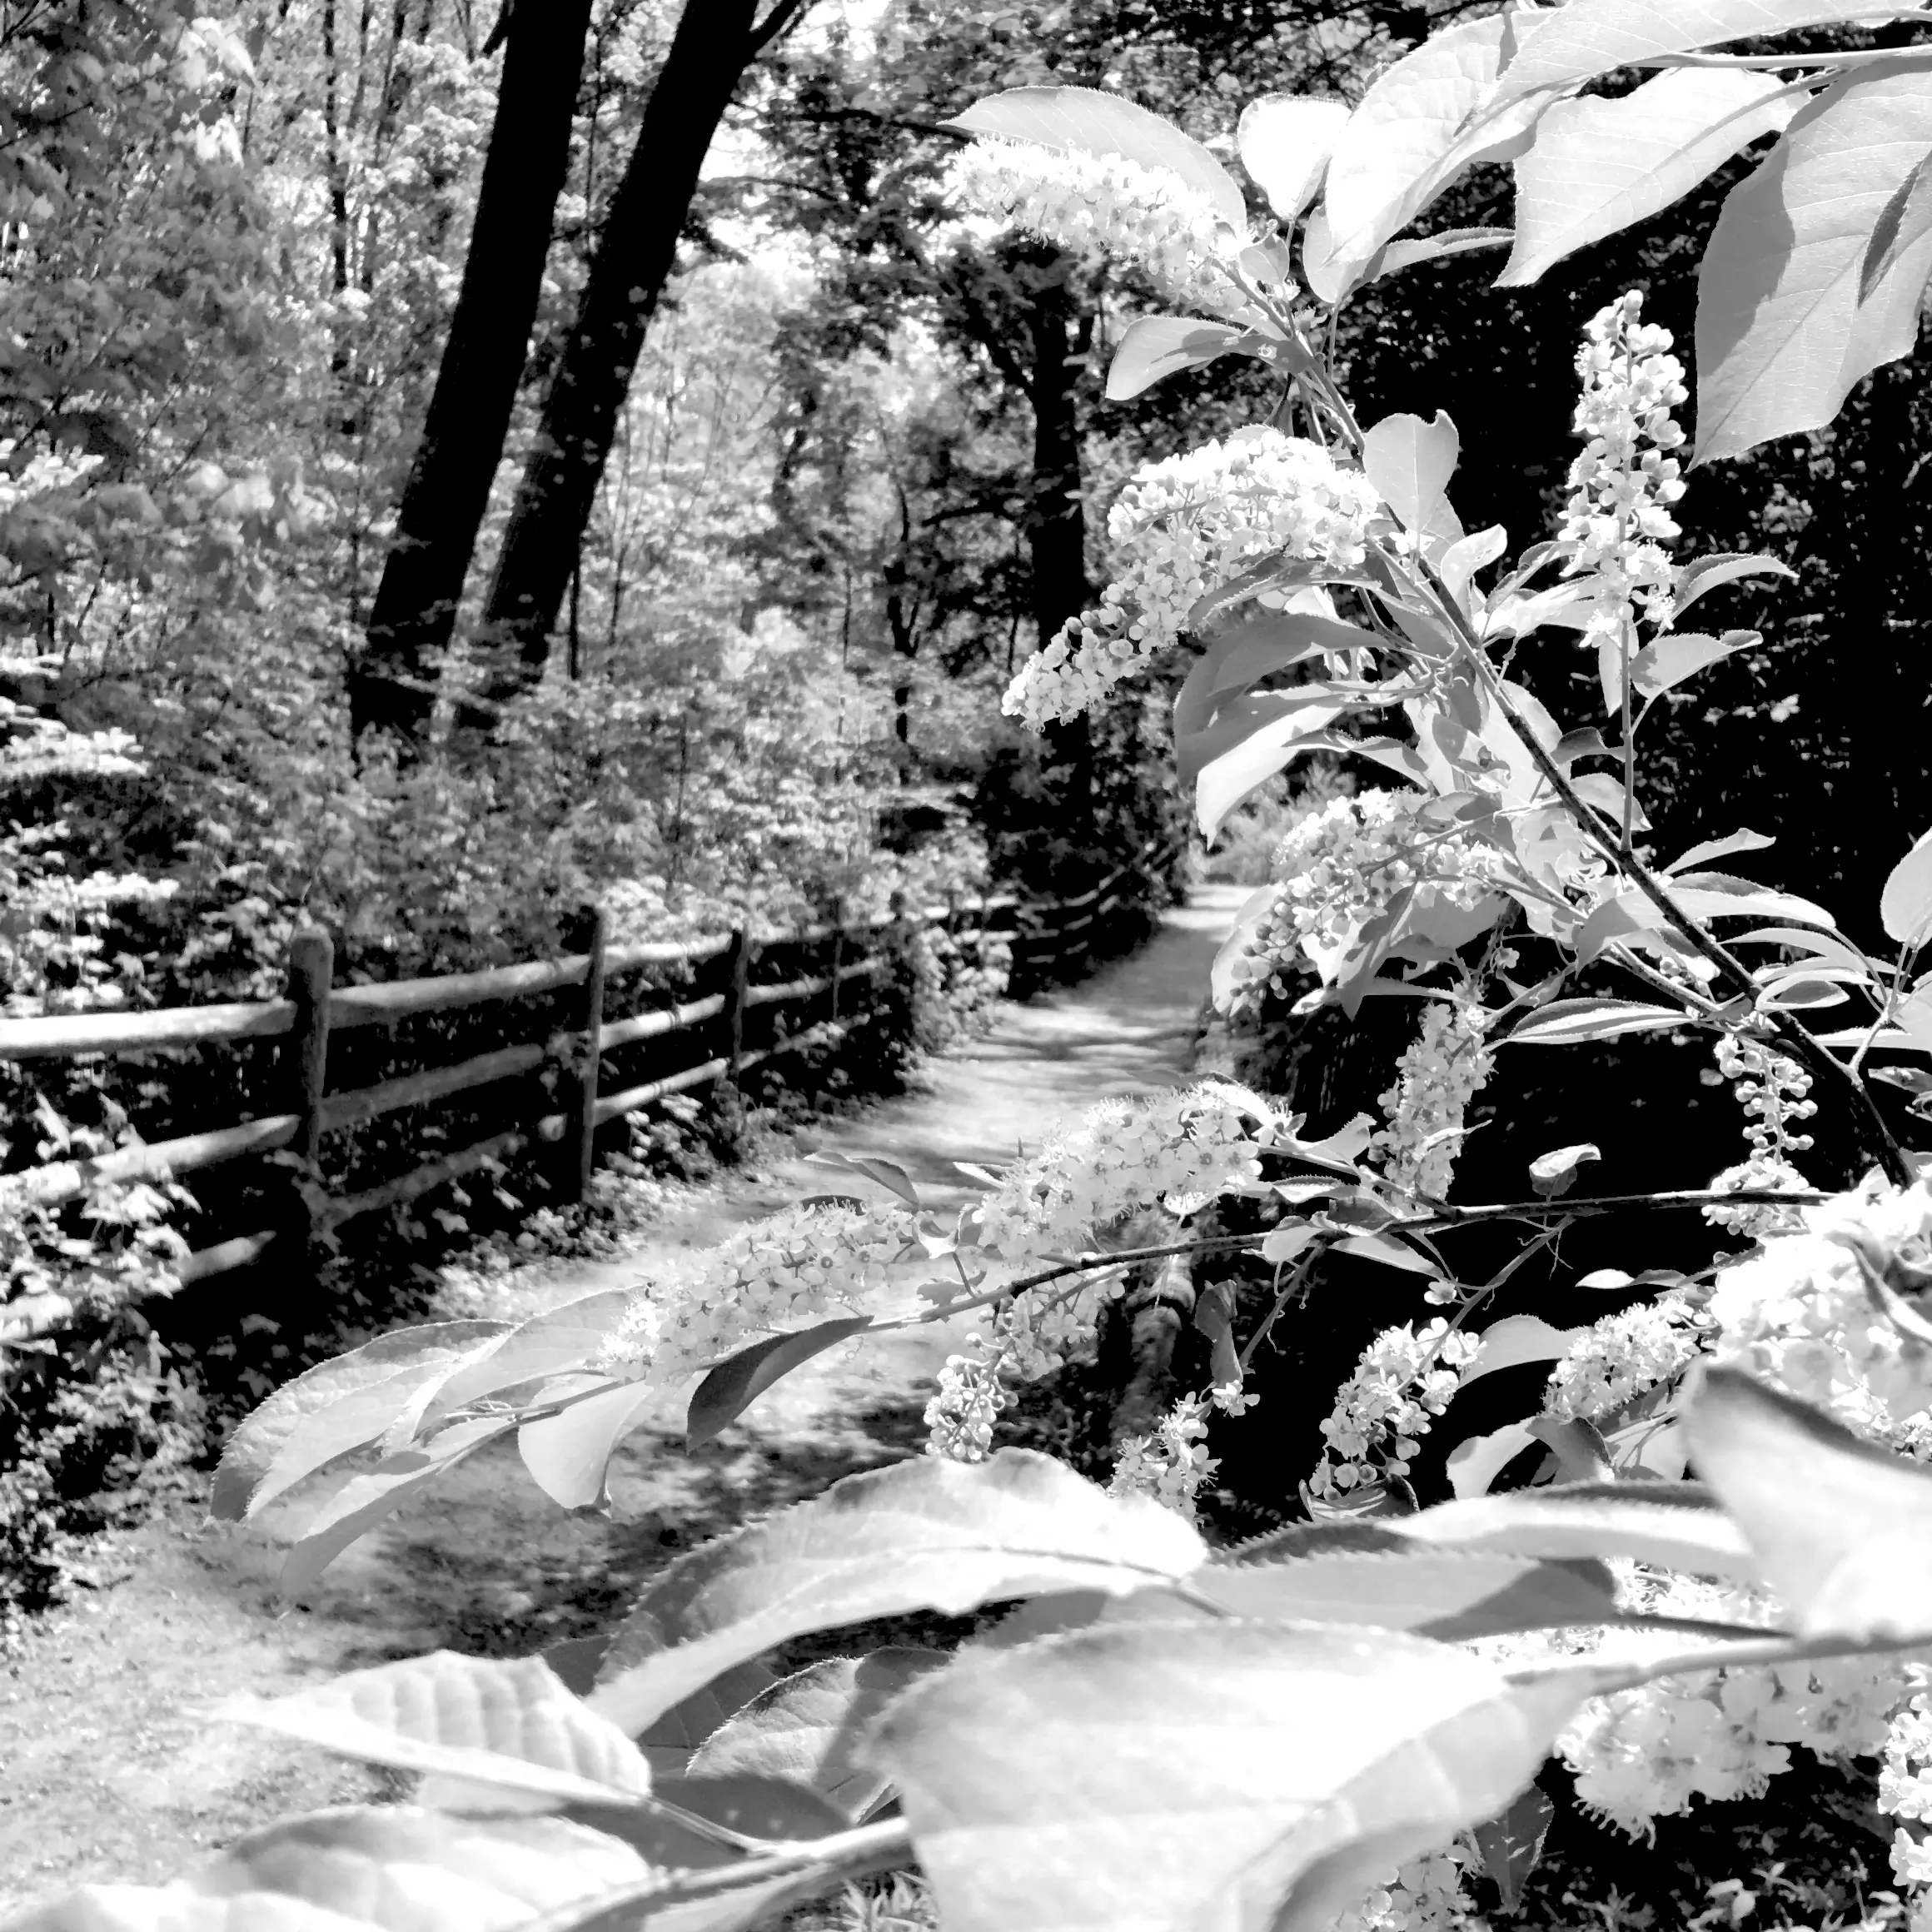 Black and white photo of trail in a forest. Foliage surrounding image and trail.